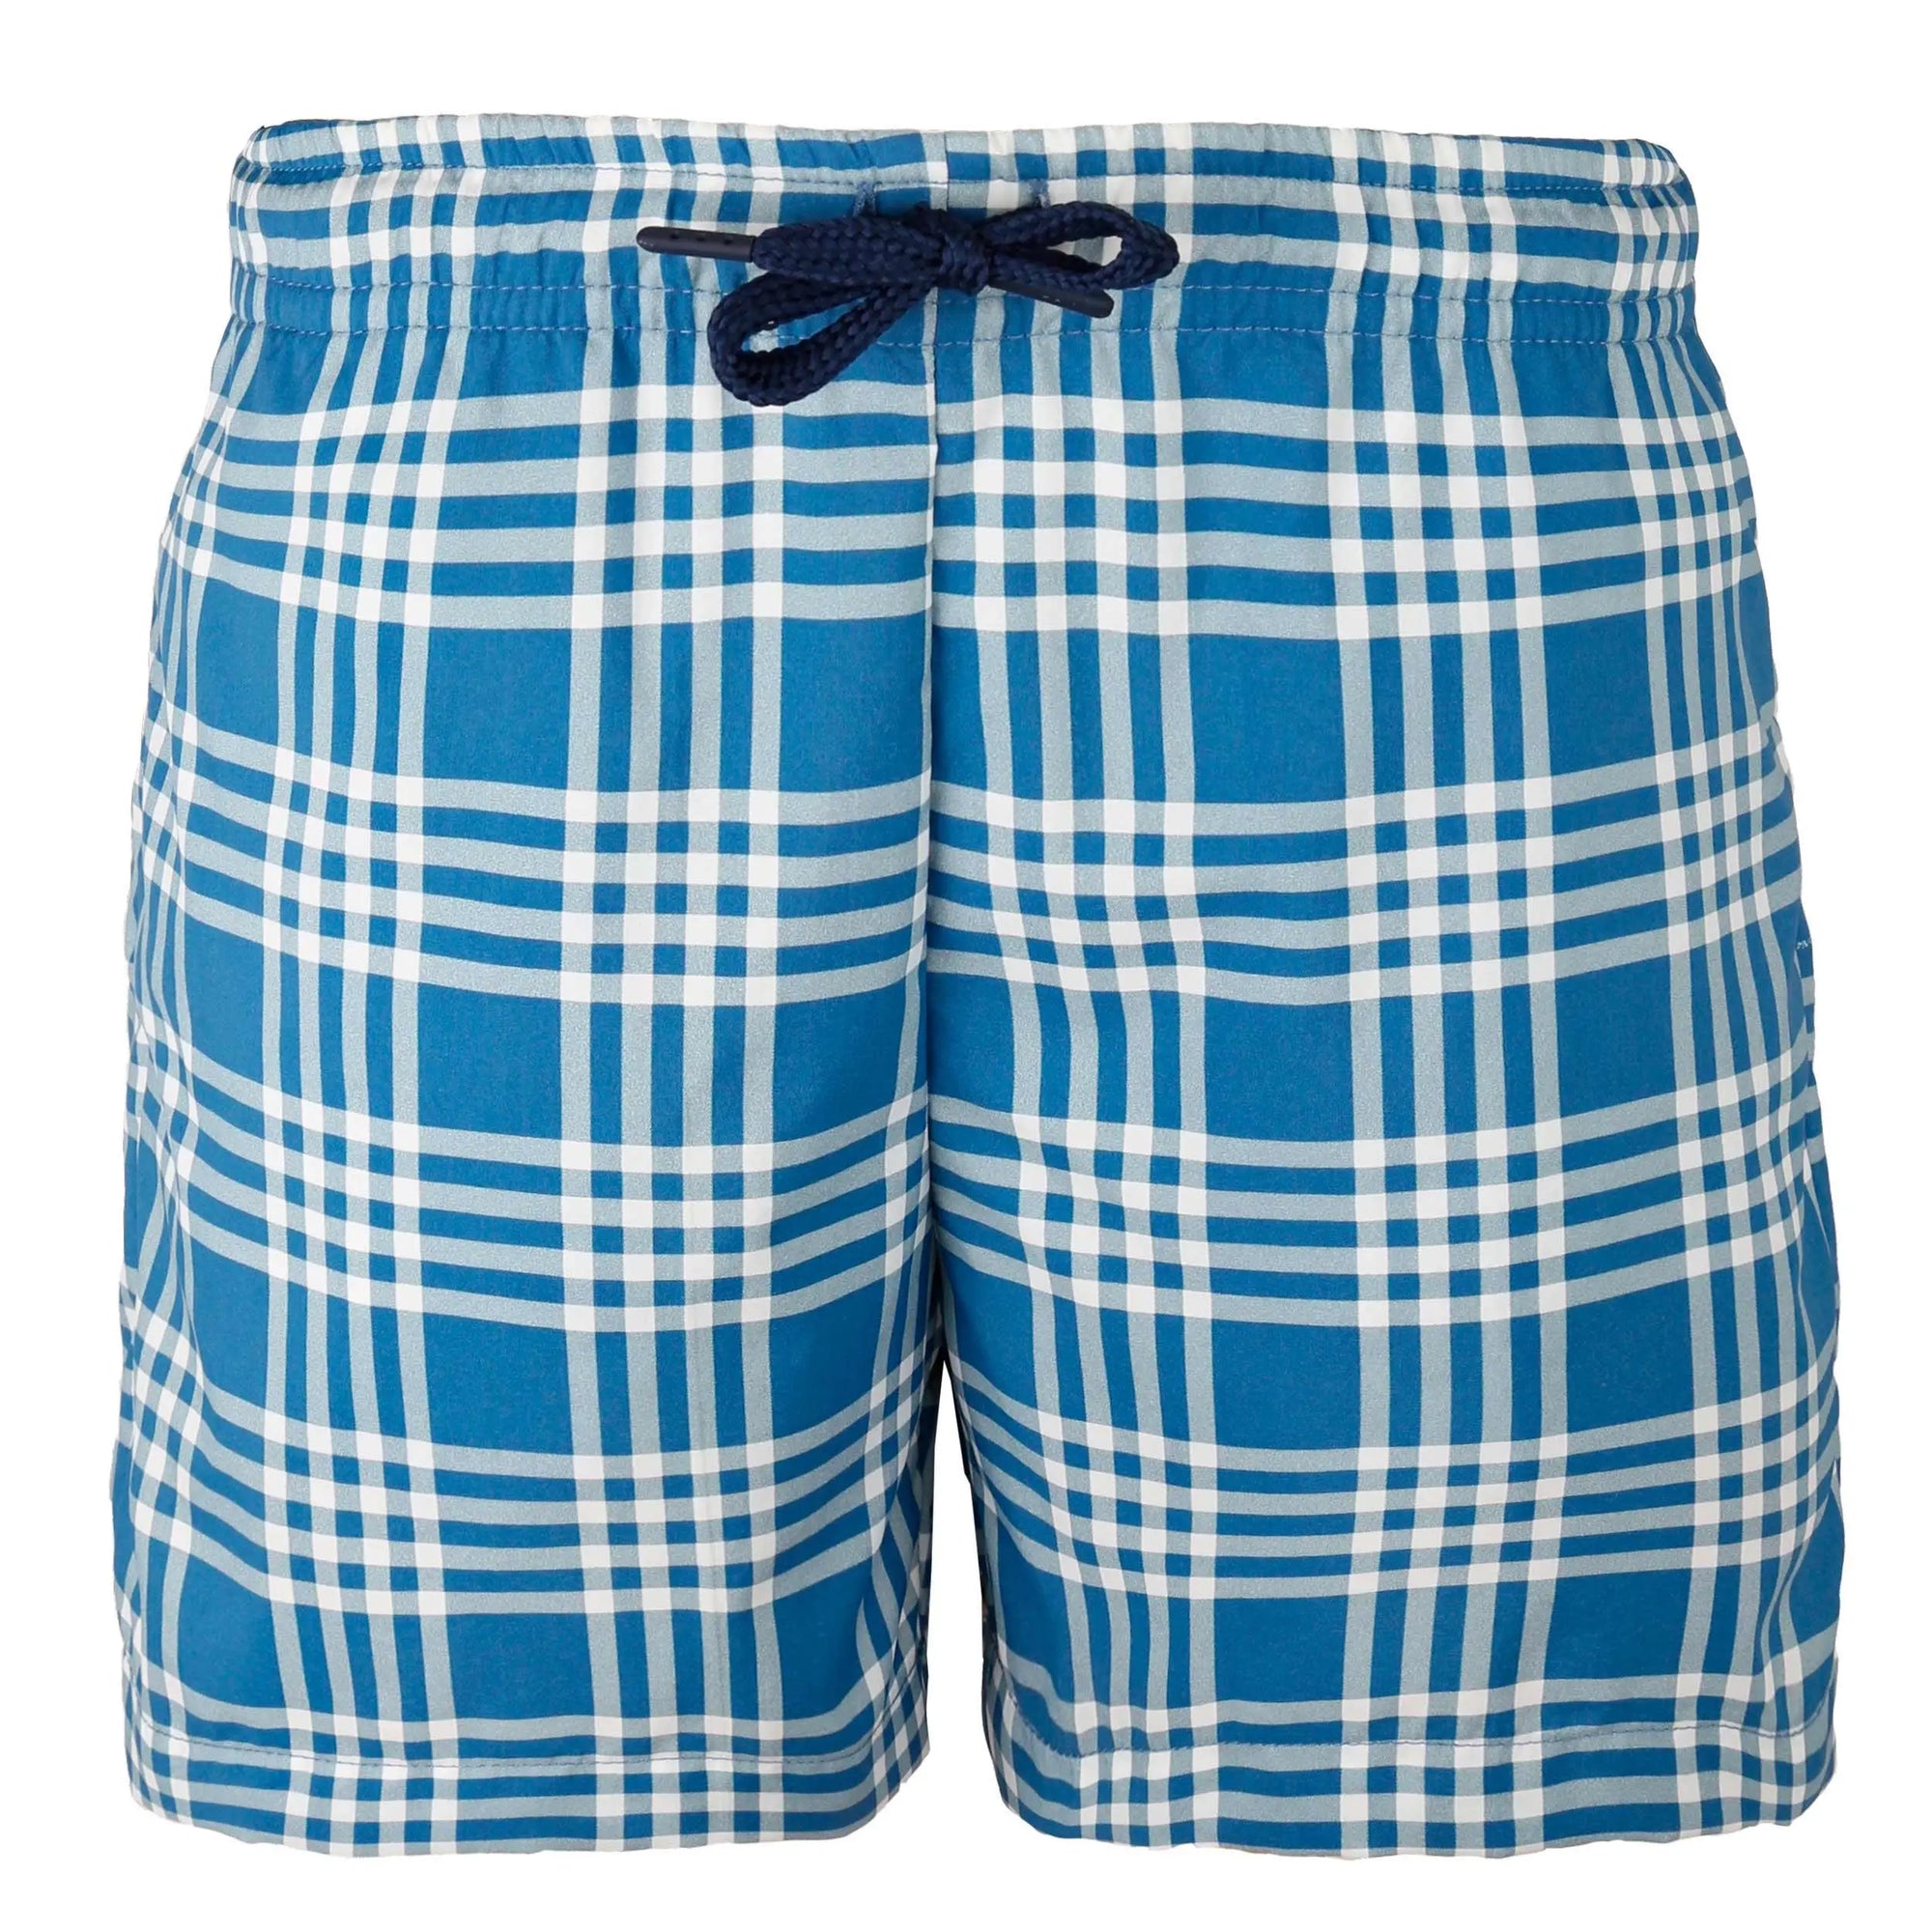 A neatly folded pair of blue and white plaid Cuatro Kids Swimwear with a navy blue drawstring is displayed inside an orange-bordered gift box. The box lid, featuring the brand name "Bassal." from the popular Bassalstore in Barcelona, is partially visible on the side. A tag with "Bassal. kids" is attached to the swimwear.